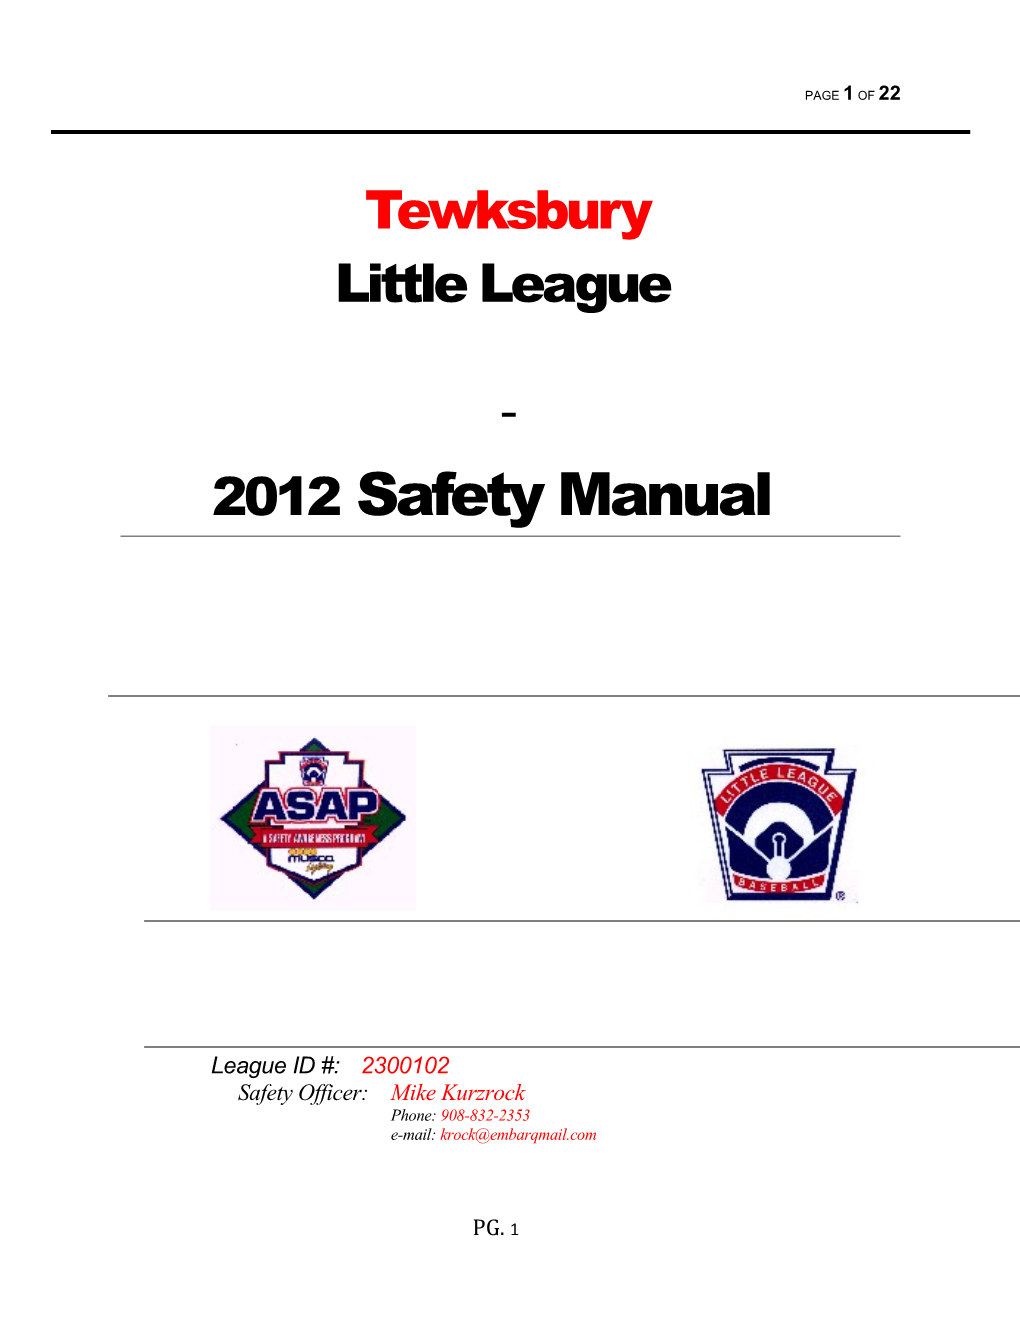 Tewksbury Little League S Policy Statement